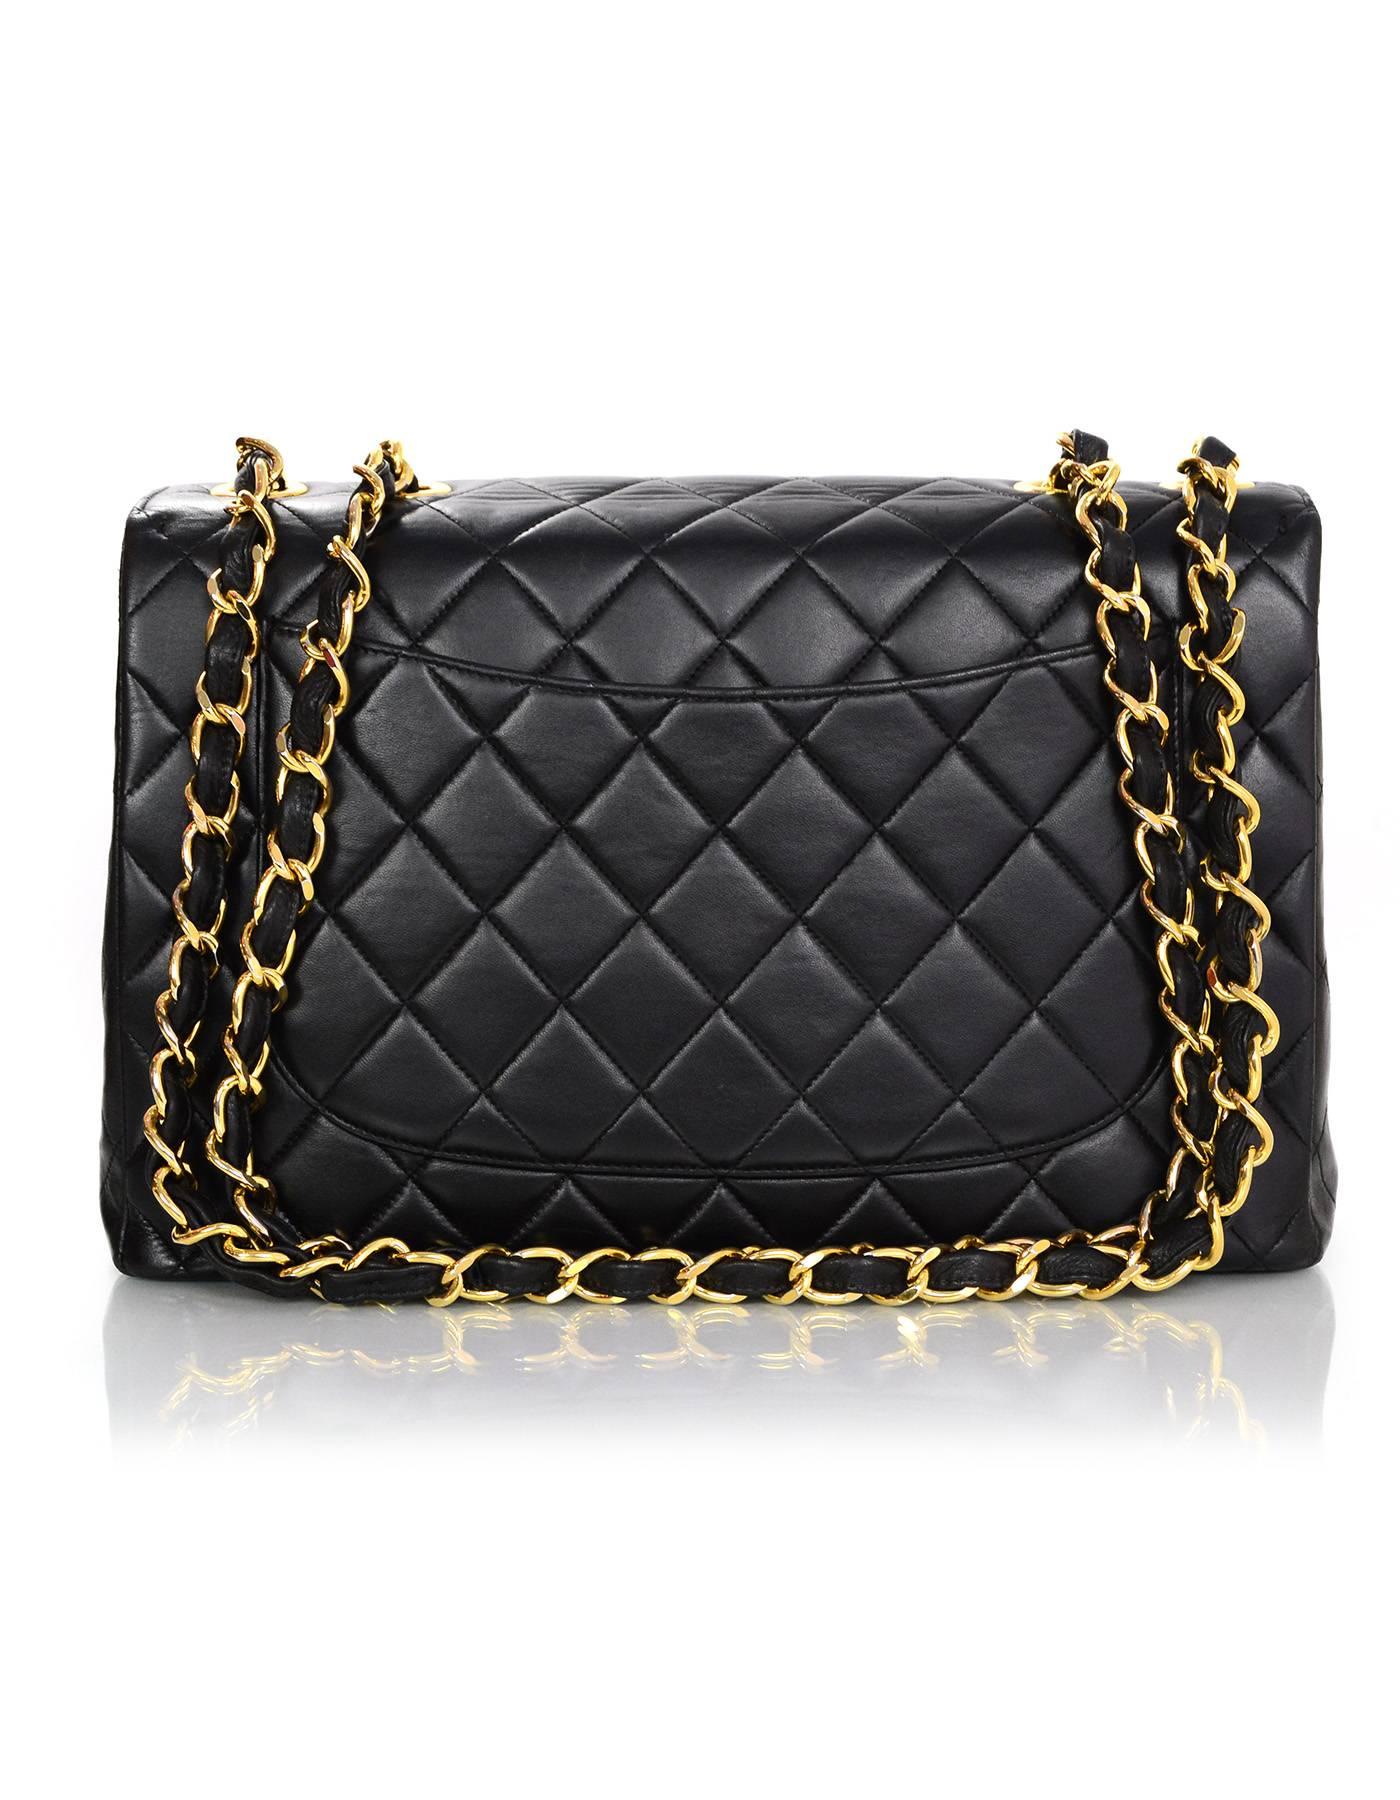 Chanel Black Quilted Classic Jumbo Flap Bag

Made In: France
Year of Production: 2000-2002
Color: Black
Hardware: Goldtone
Materials: Lambskin
Lining: Black and burgundy leather
Closure/opening: Flap top with CC twist lock
Exterior Pockets: One back